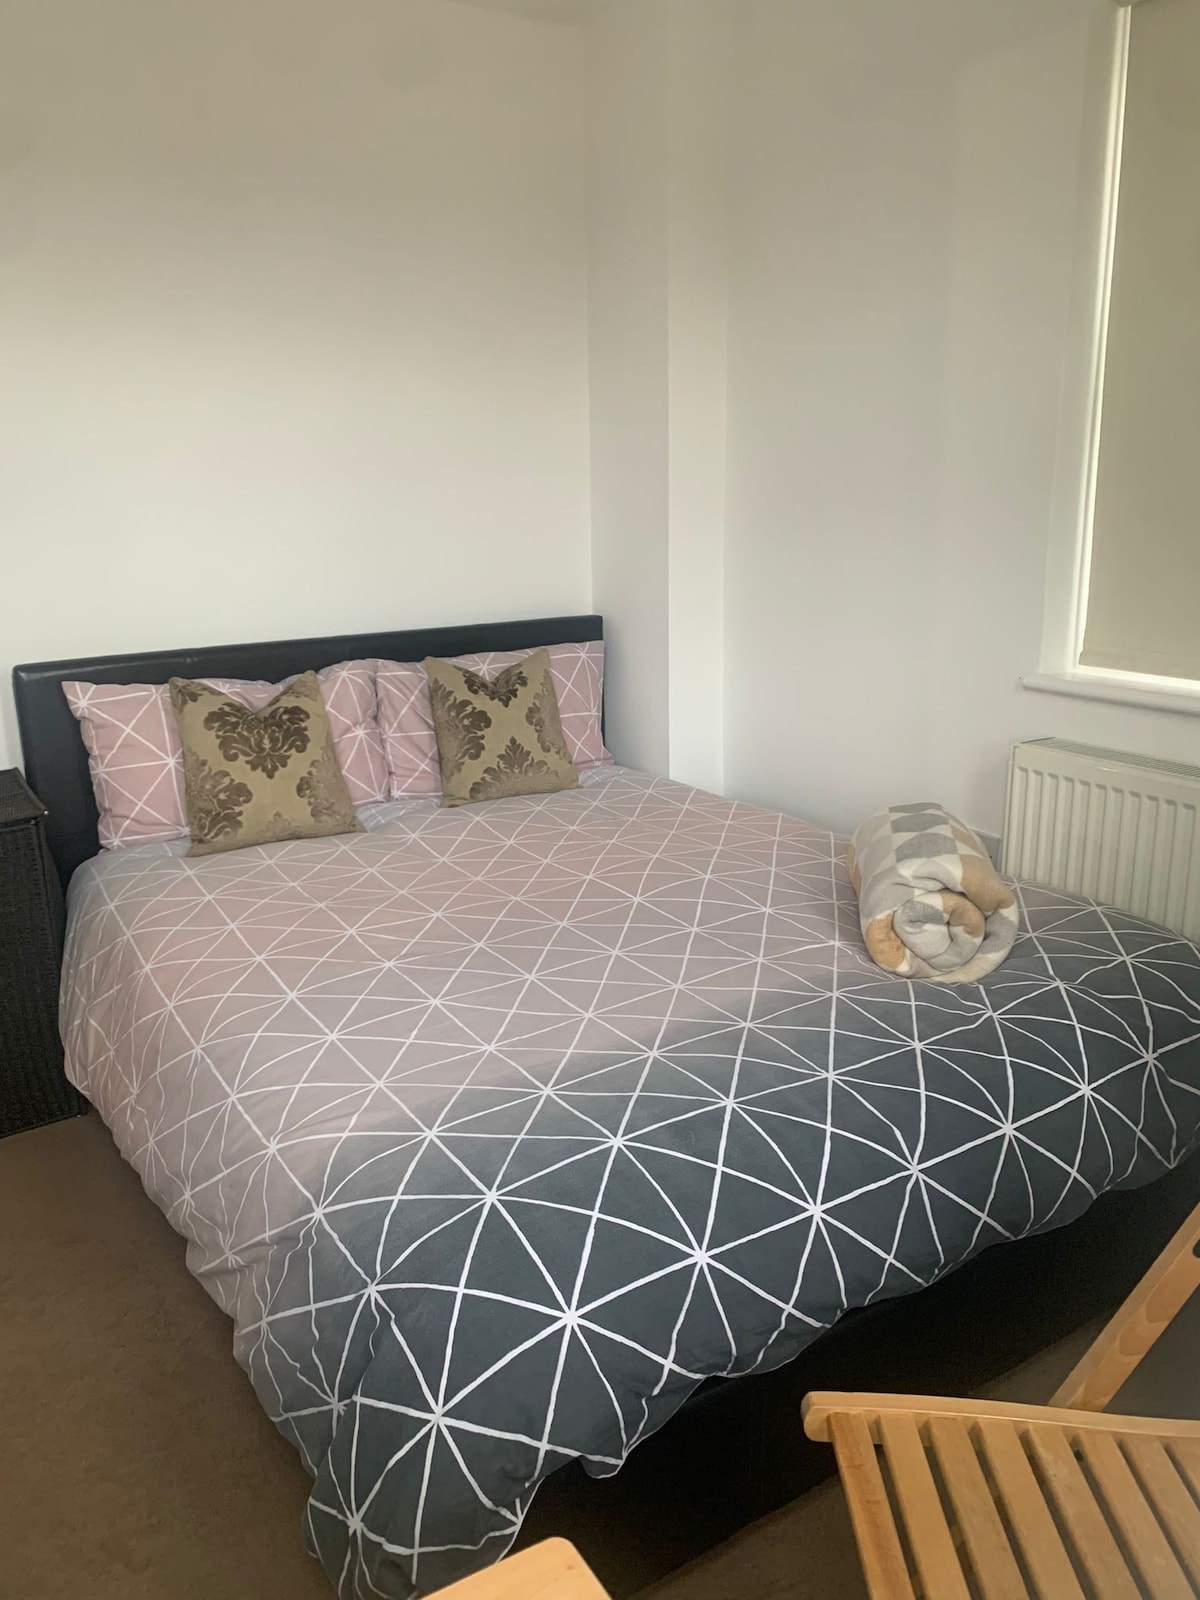 Homely 2bd flat - West London